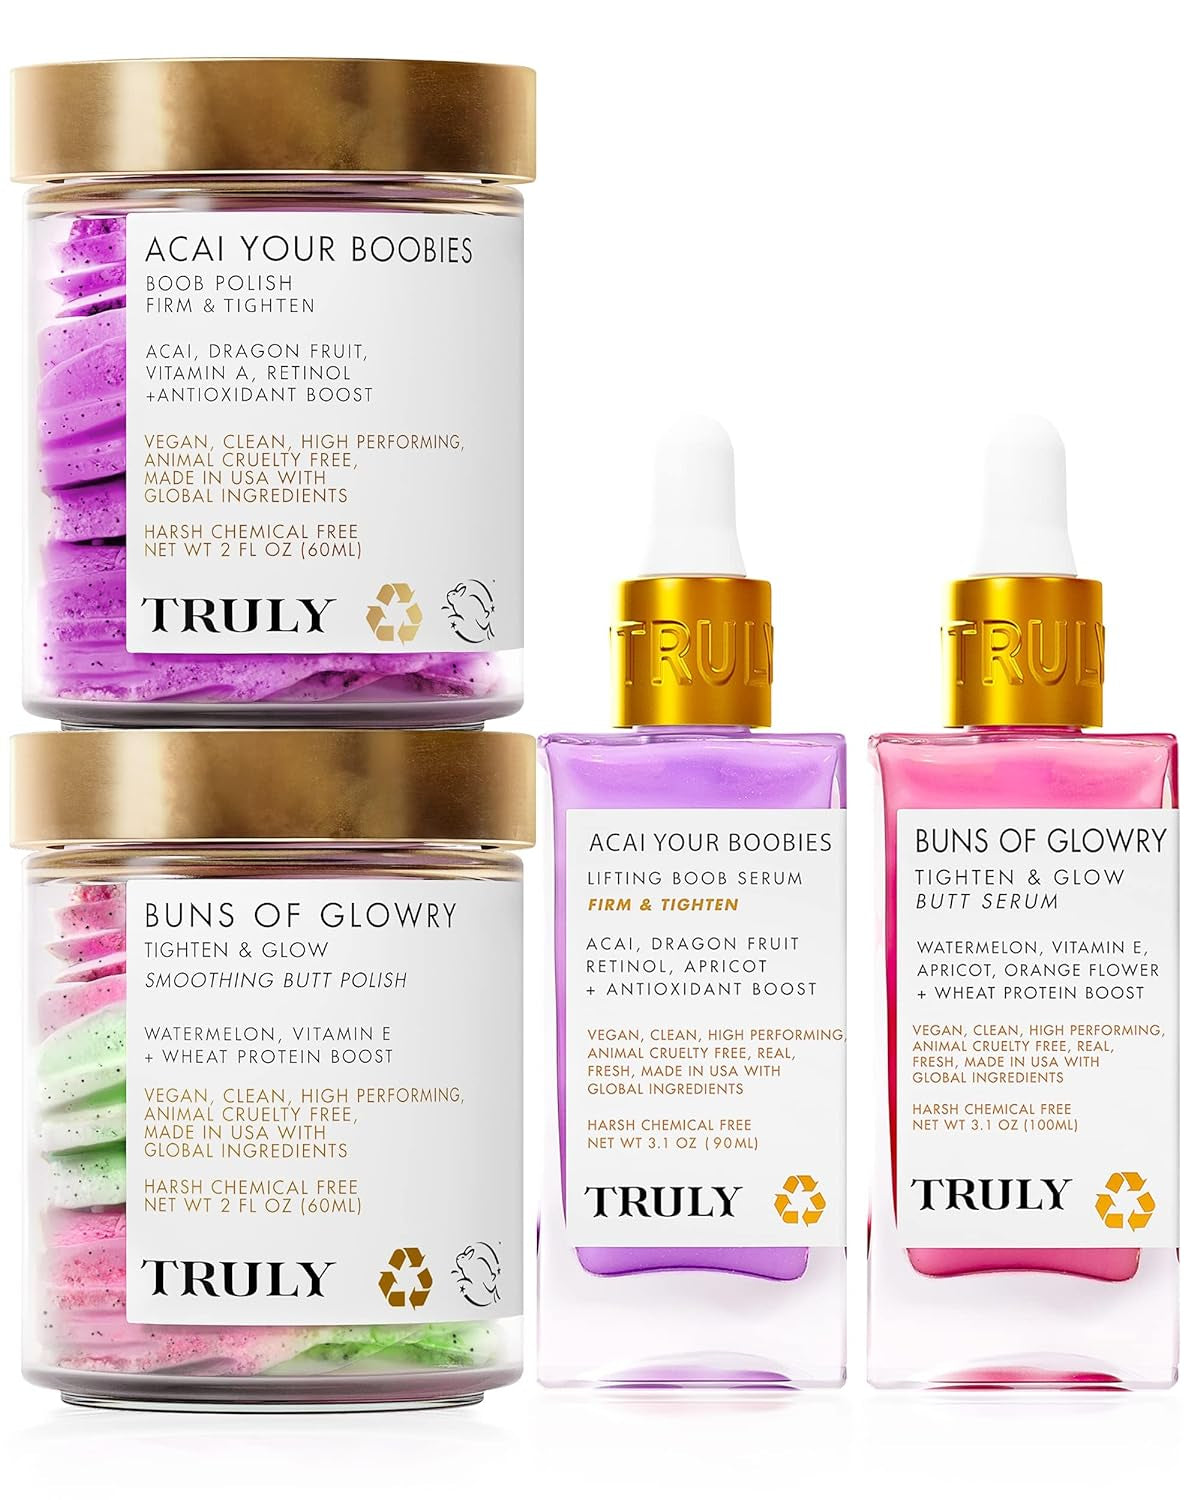 Truly Beauty "Booty & Boobies" Polish Bundle - Firms, Tightens, and Smoothens - Butt Acne Clearing Treatment, Butt and Breast Scrub - Smoothens and Tightens Skin for a Plumpier and Perkier Glow!